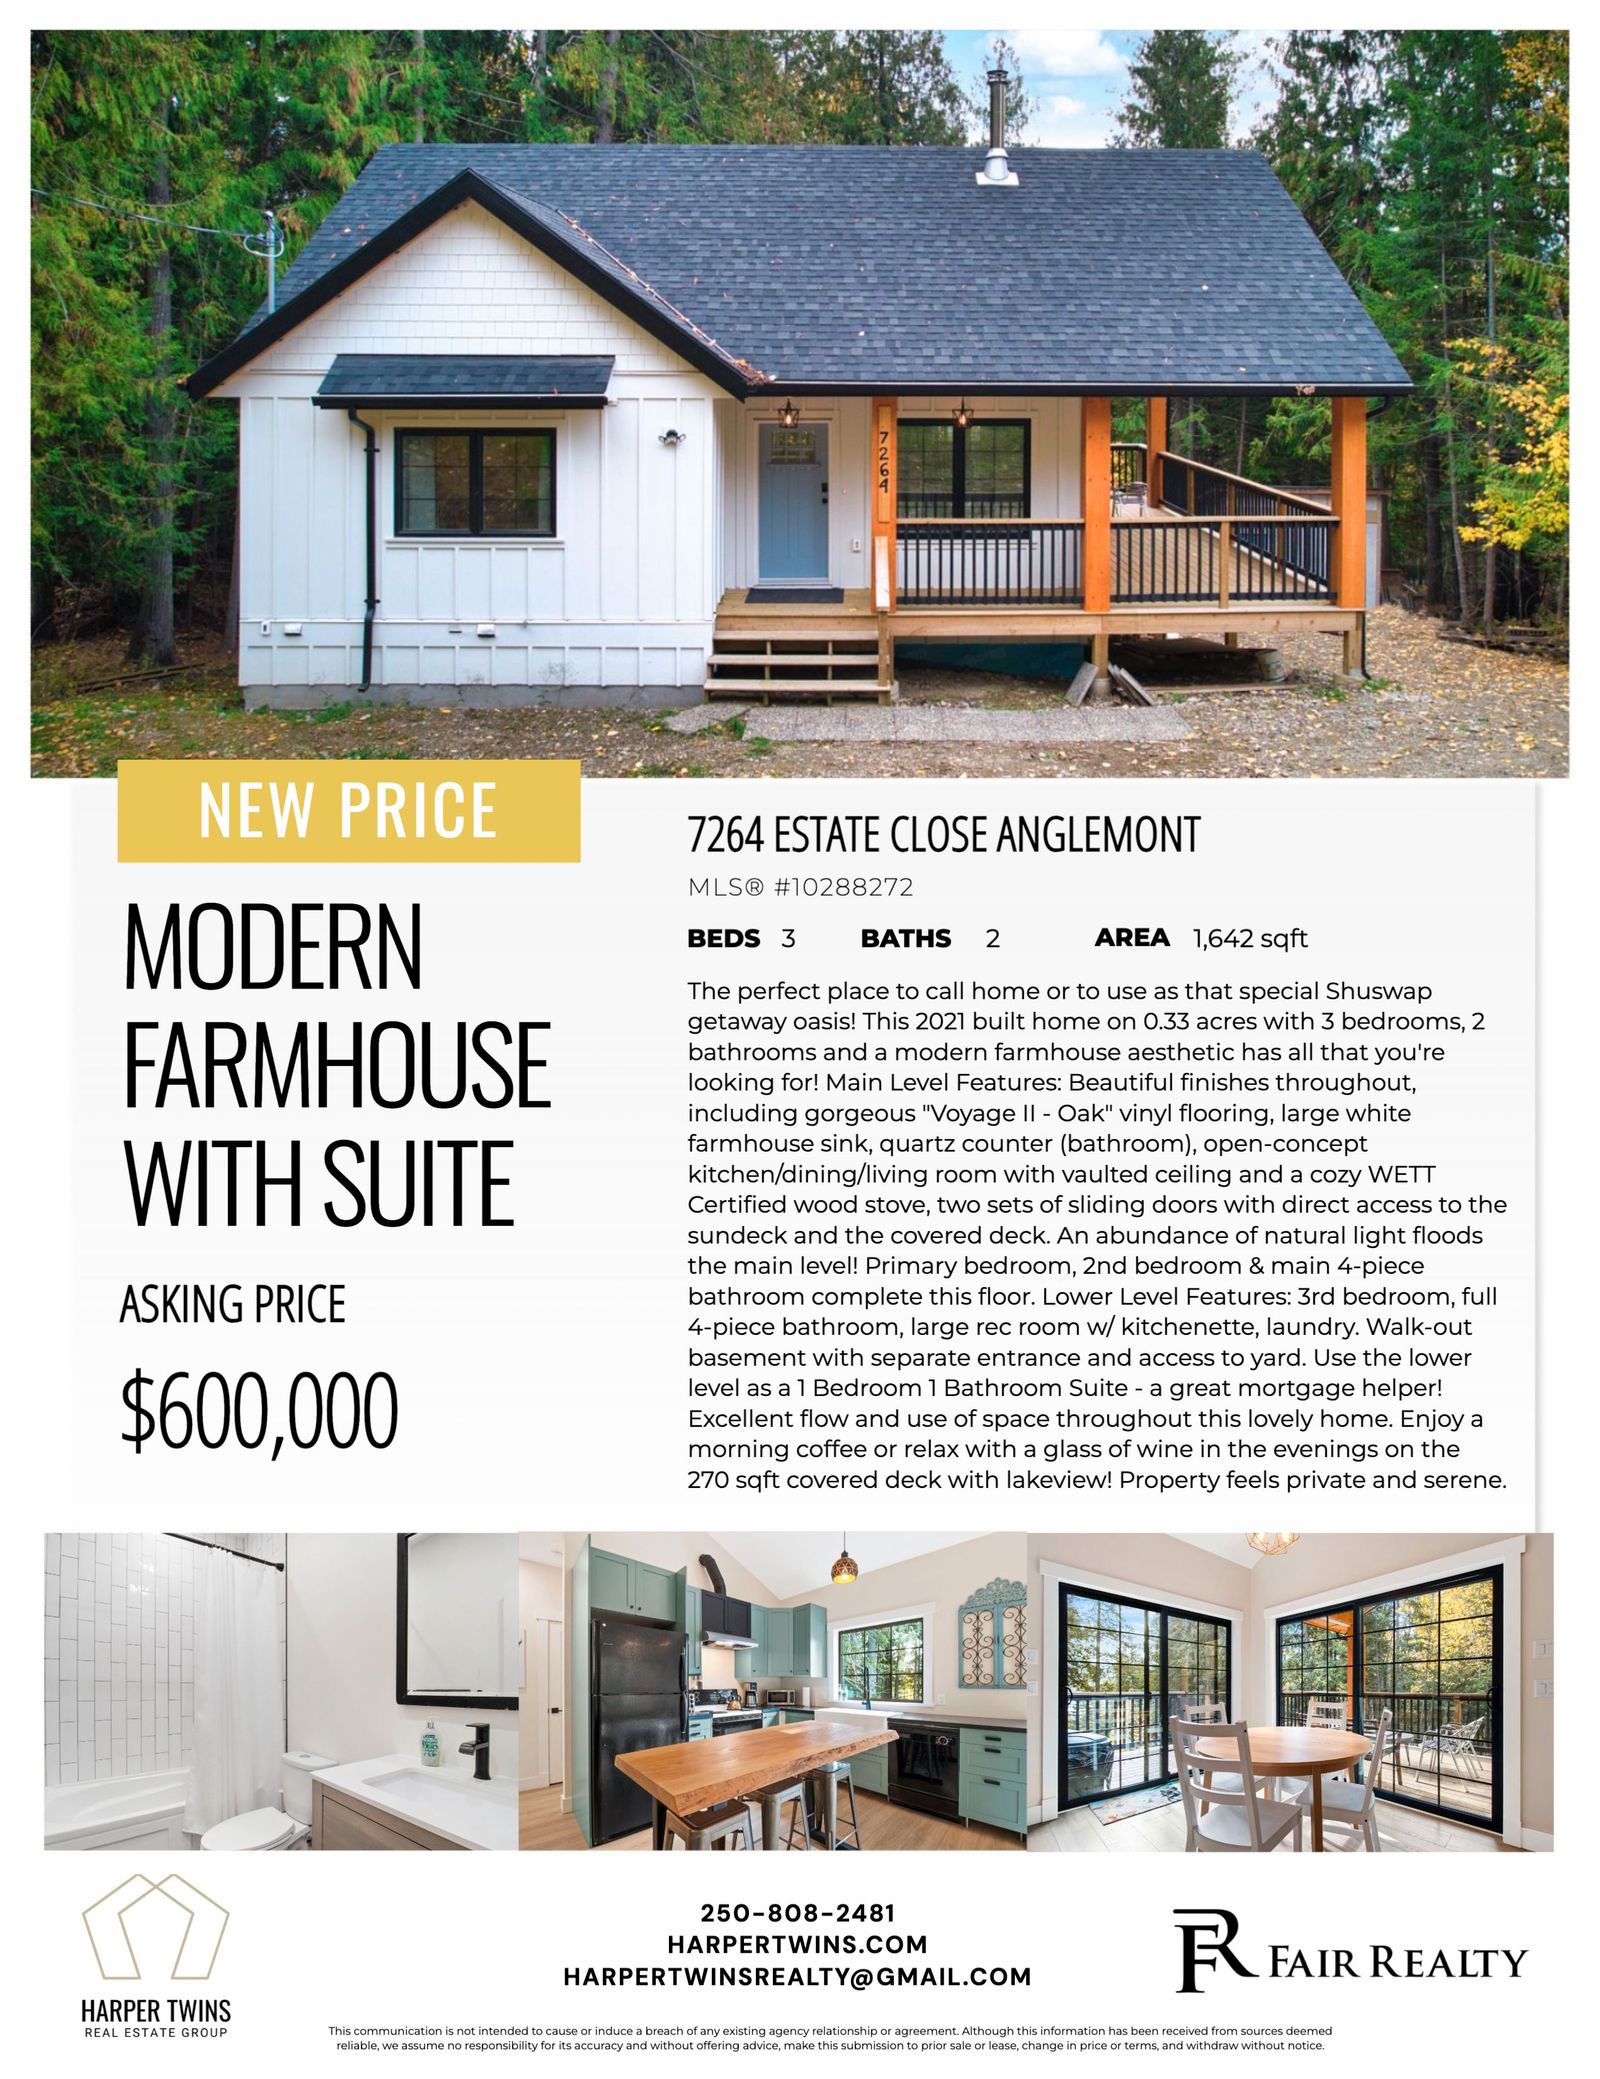 MODERN FARMHOUSE WITH SUITE FOR SALE IN ENDERBY